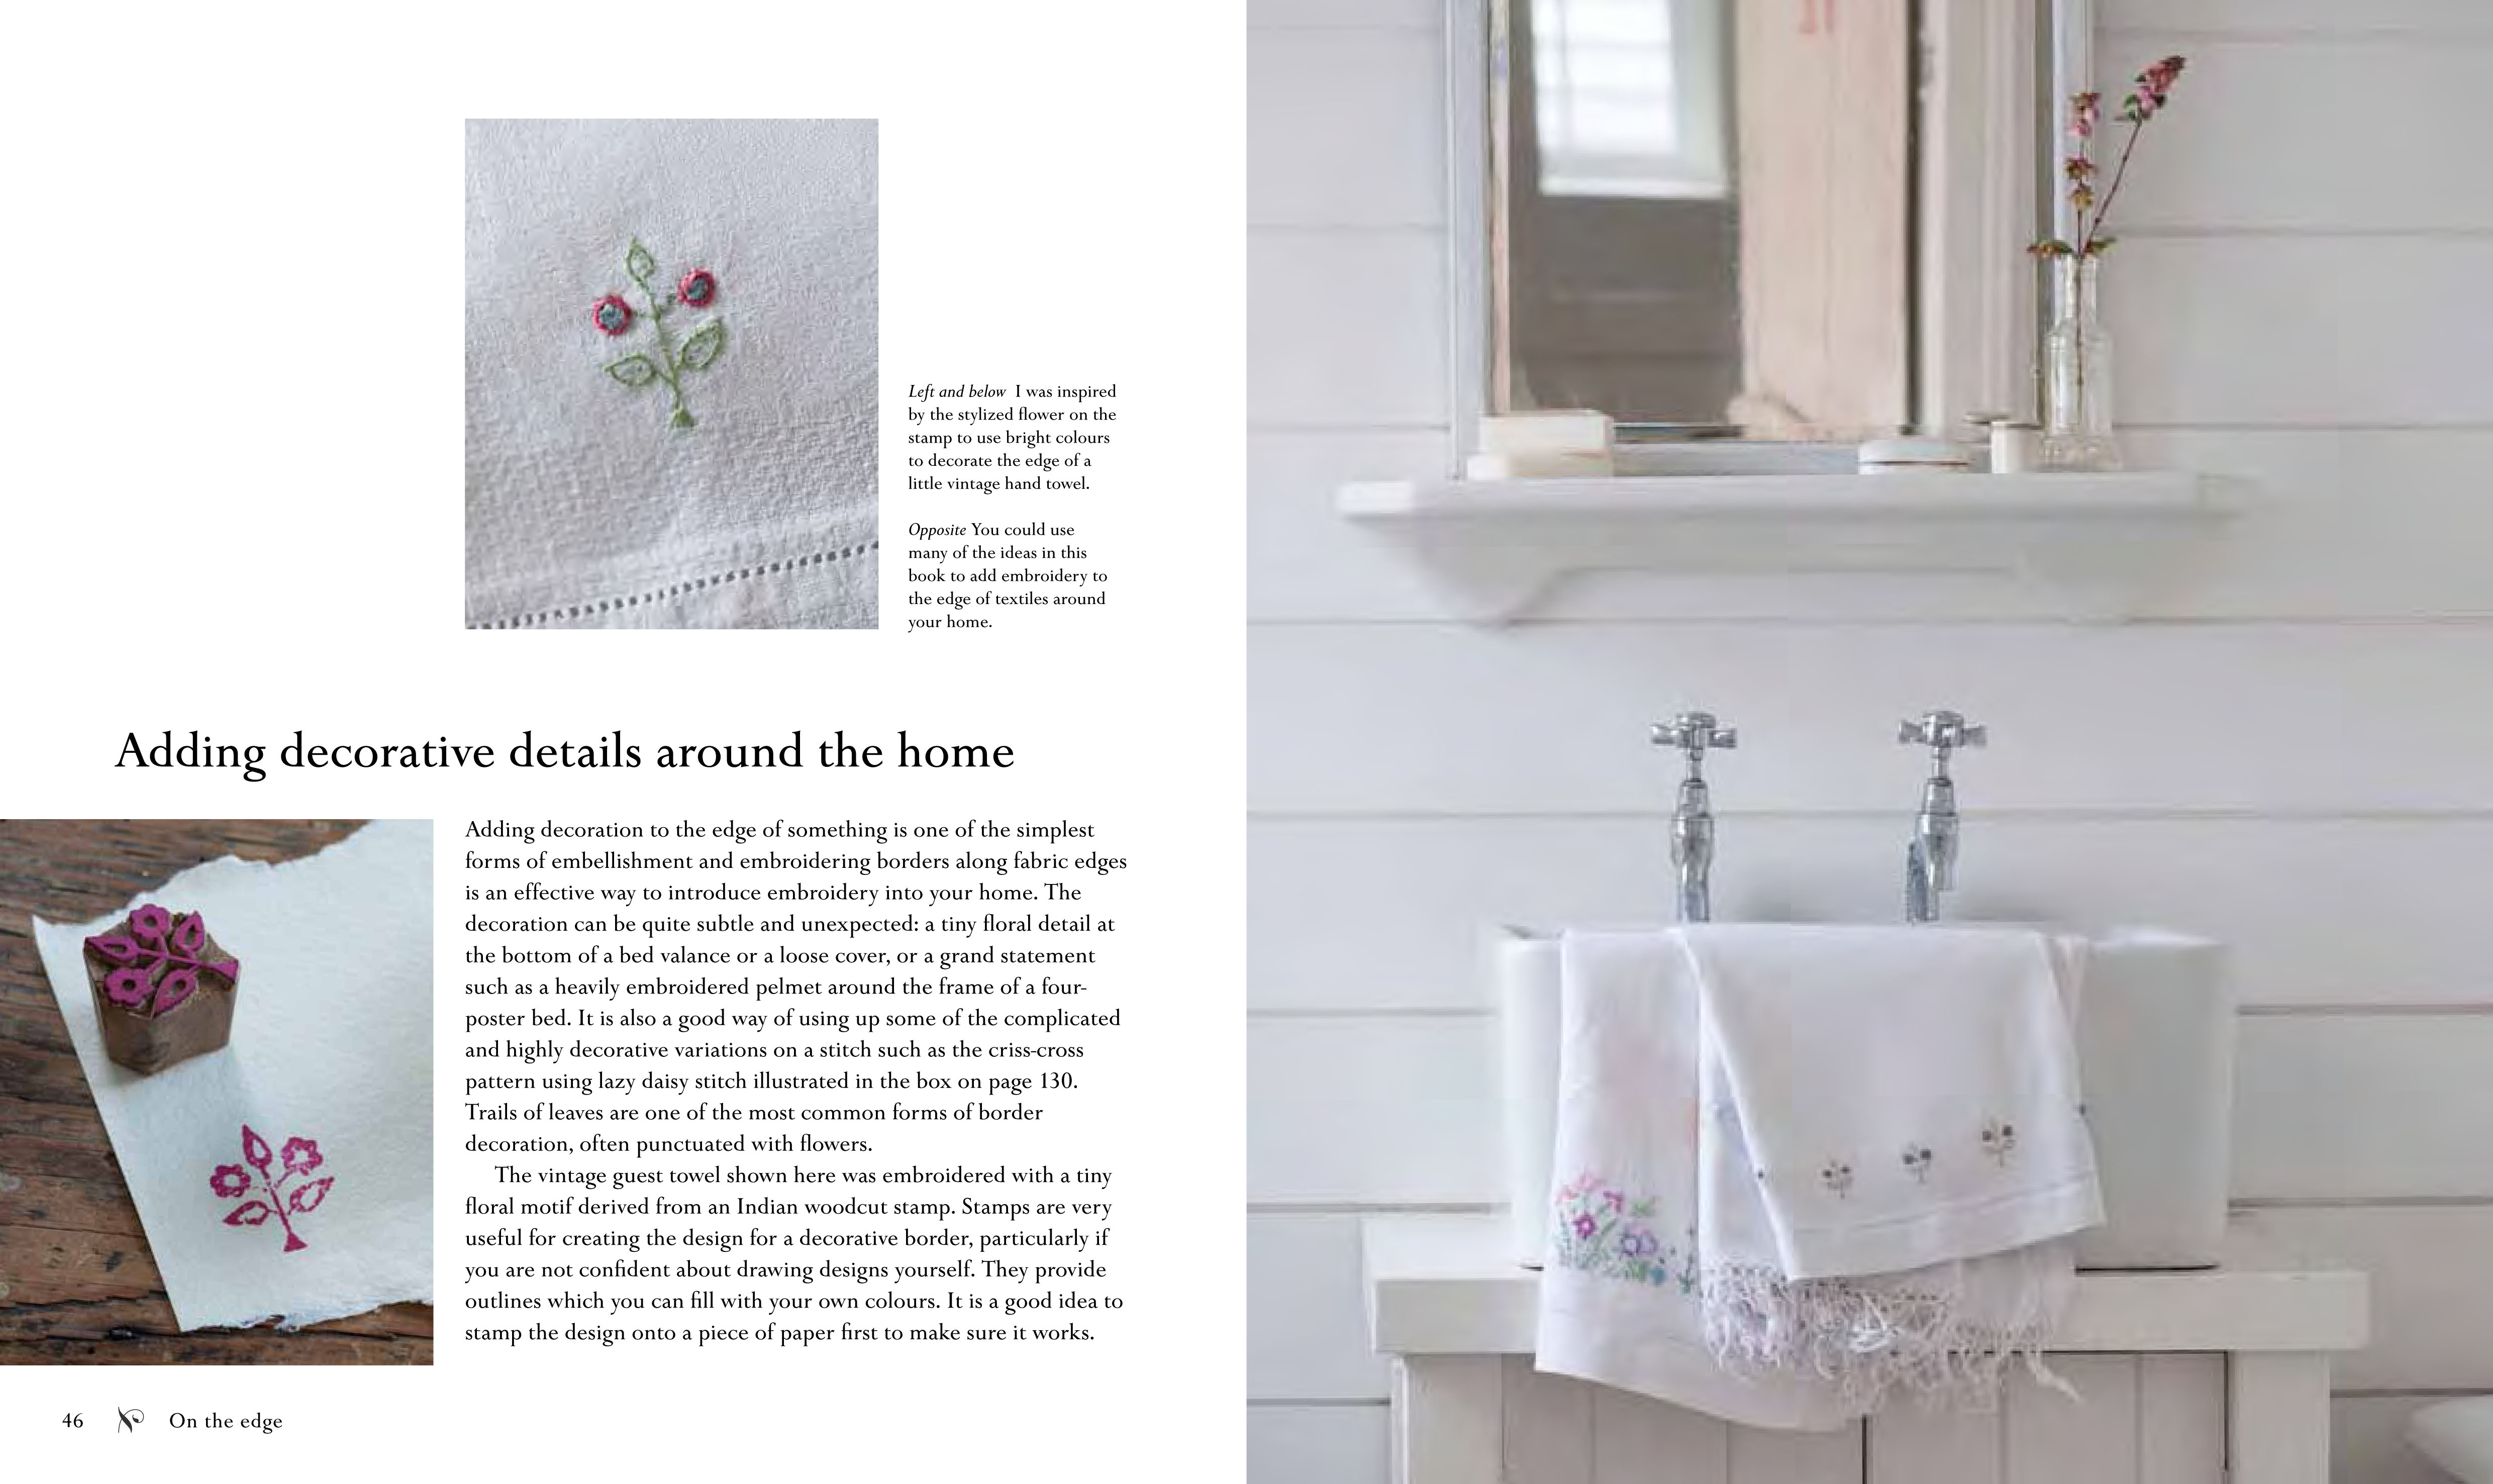 "The Hand-Stitched Home: Projects and Inspiration for Creating Embroidered Textiles for the Home by Caroline Zoob.